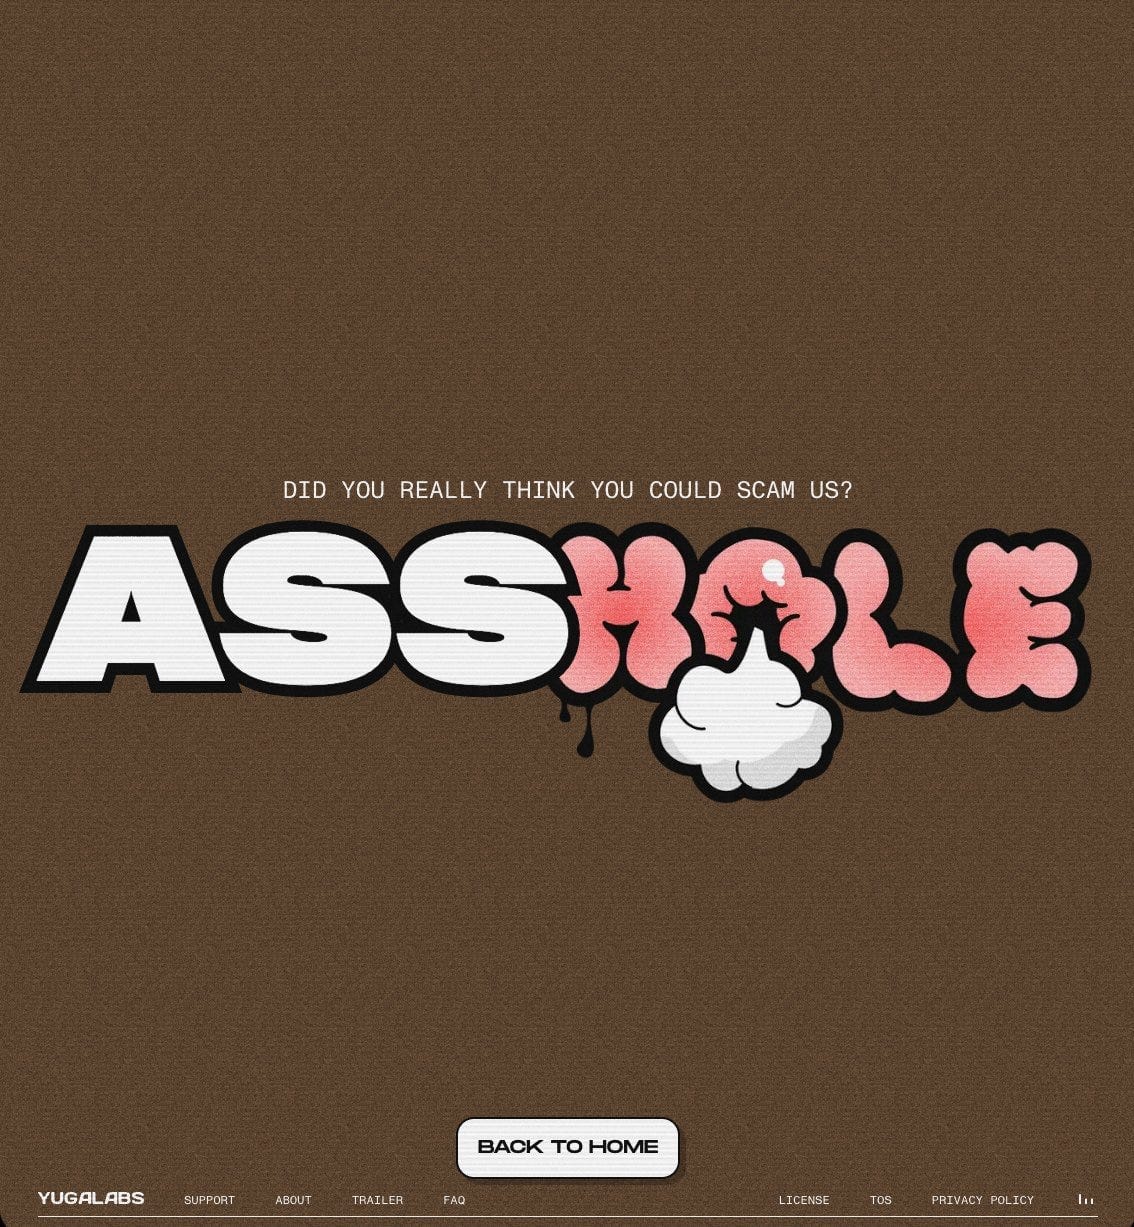 Brown background with white text reading "Did you really think you could scam us?" Below that in much larger text is the word "asshole" in block letters. "Hole" is rendered from pink, intestine-looking shapes, with a white fart cloud coming from the O.